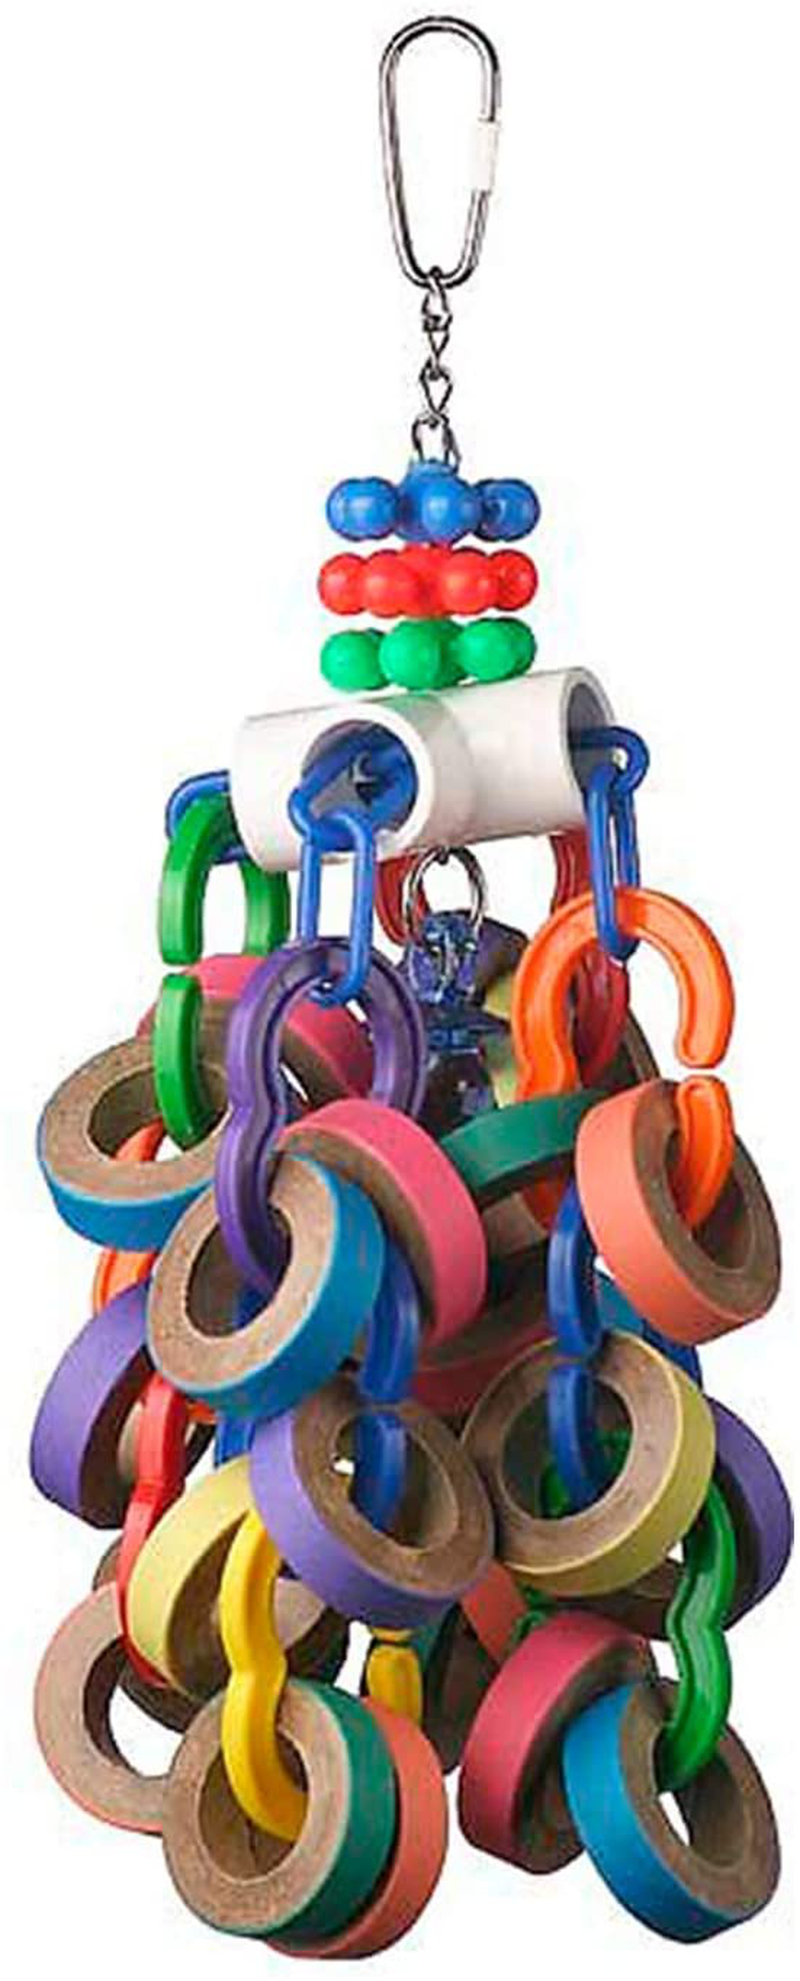 Super Bird SB1107 Chewable Paper Bagel Cascade Bird Toy with Colorful Plastic Chains, Large Size, 15” X 4.5”